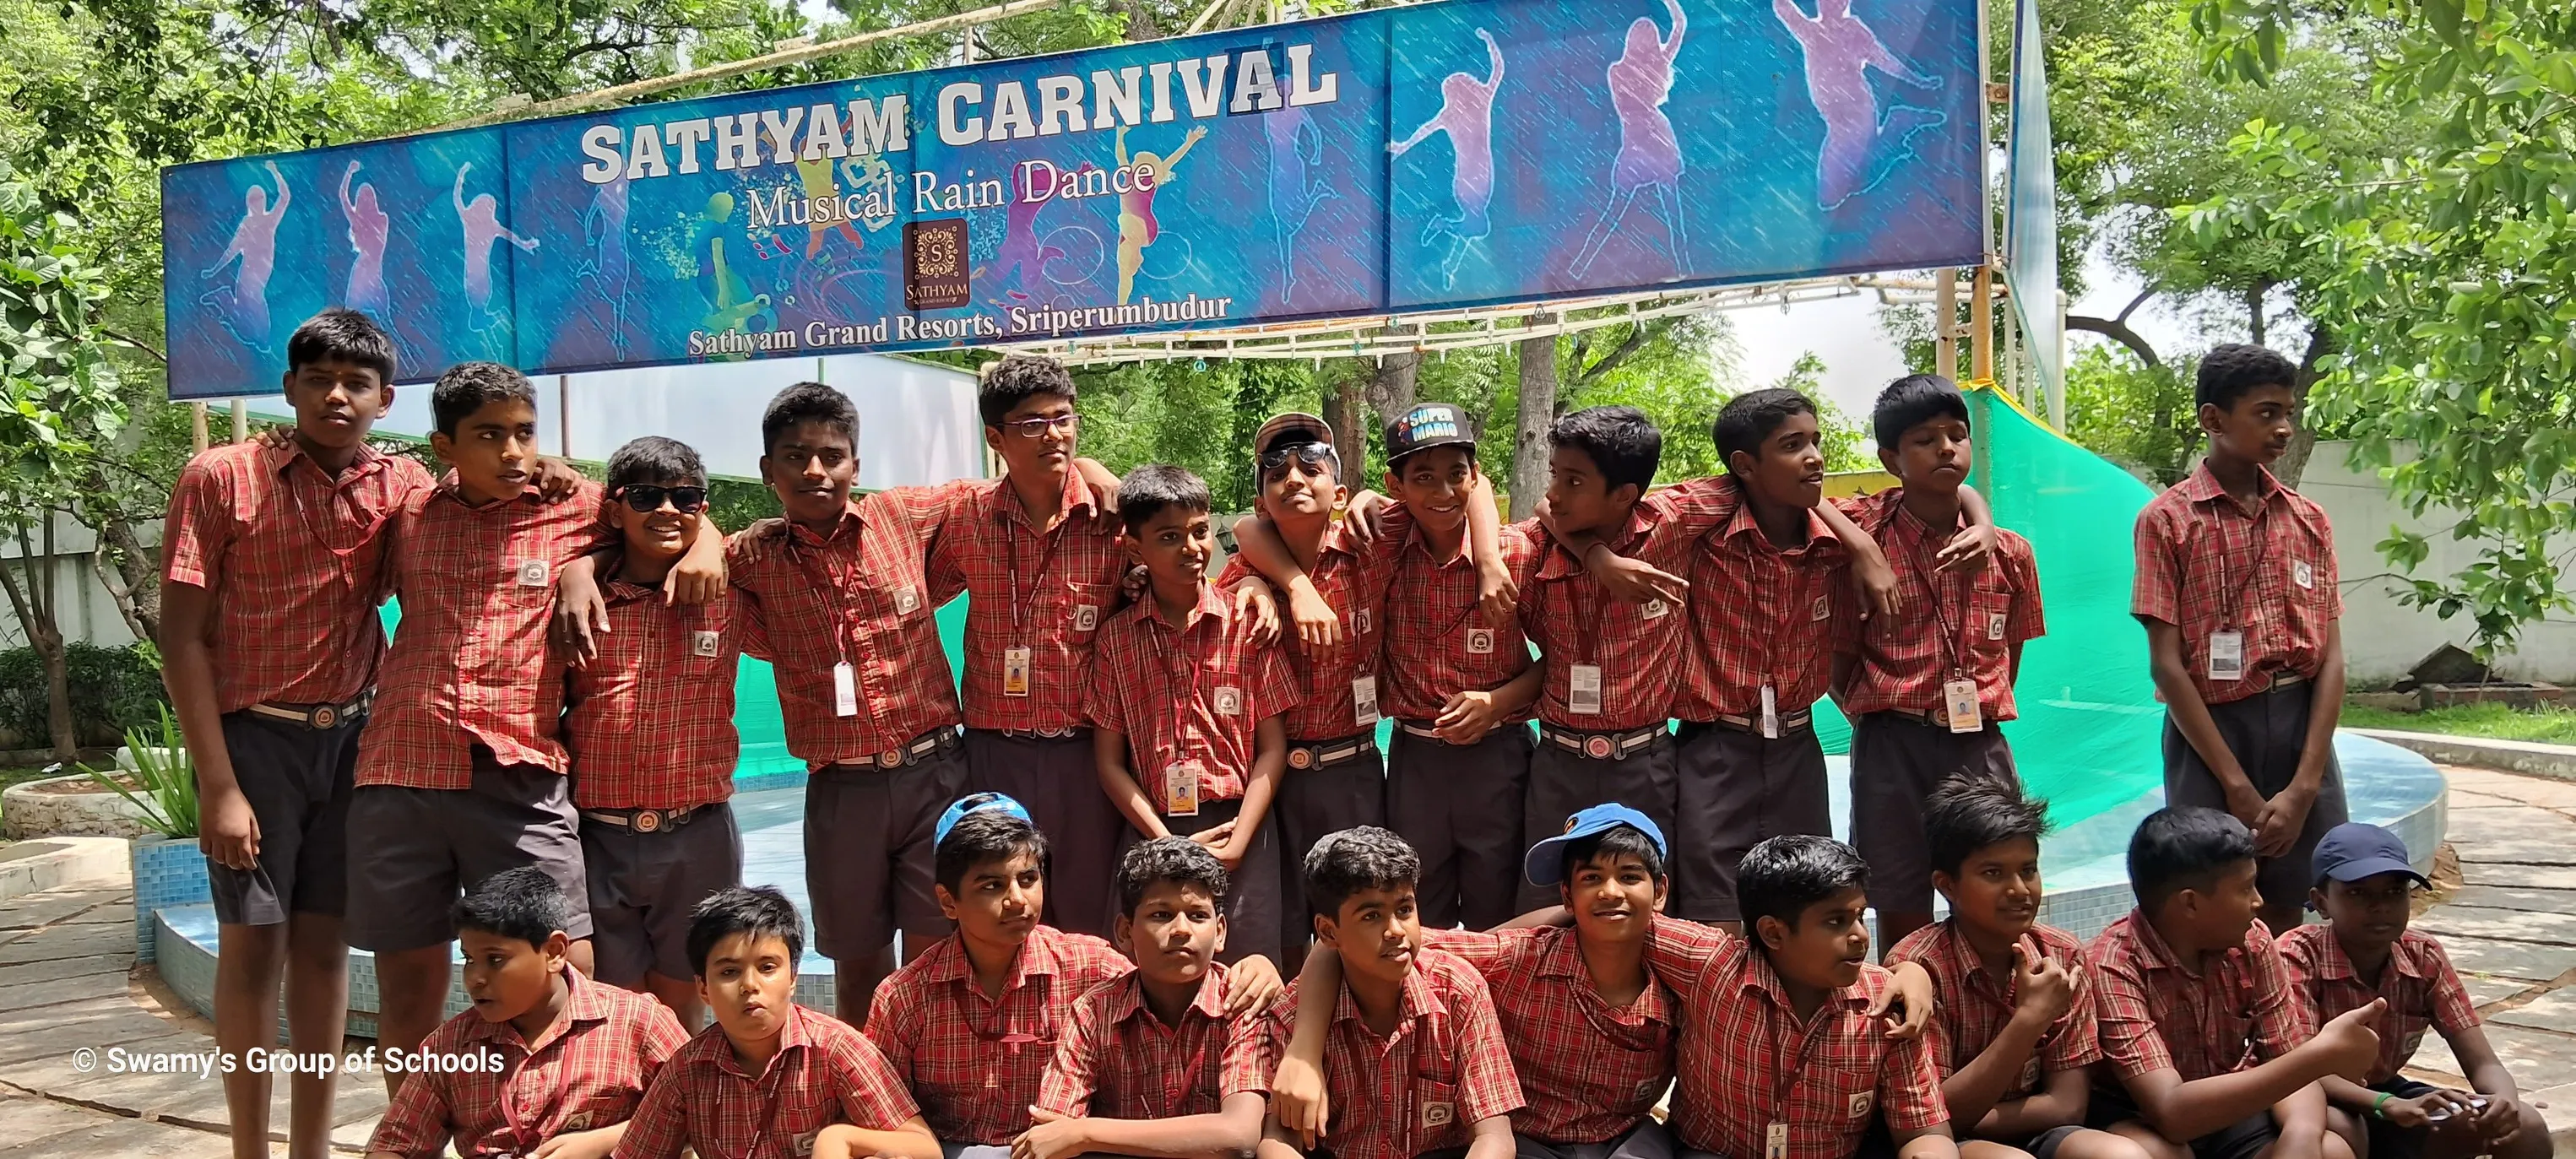 Field Trip to Sathyam Grand Carnival